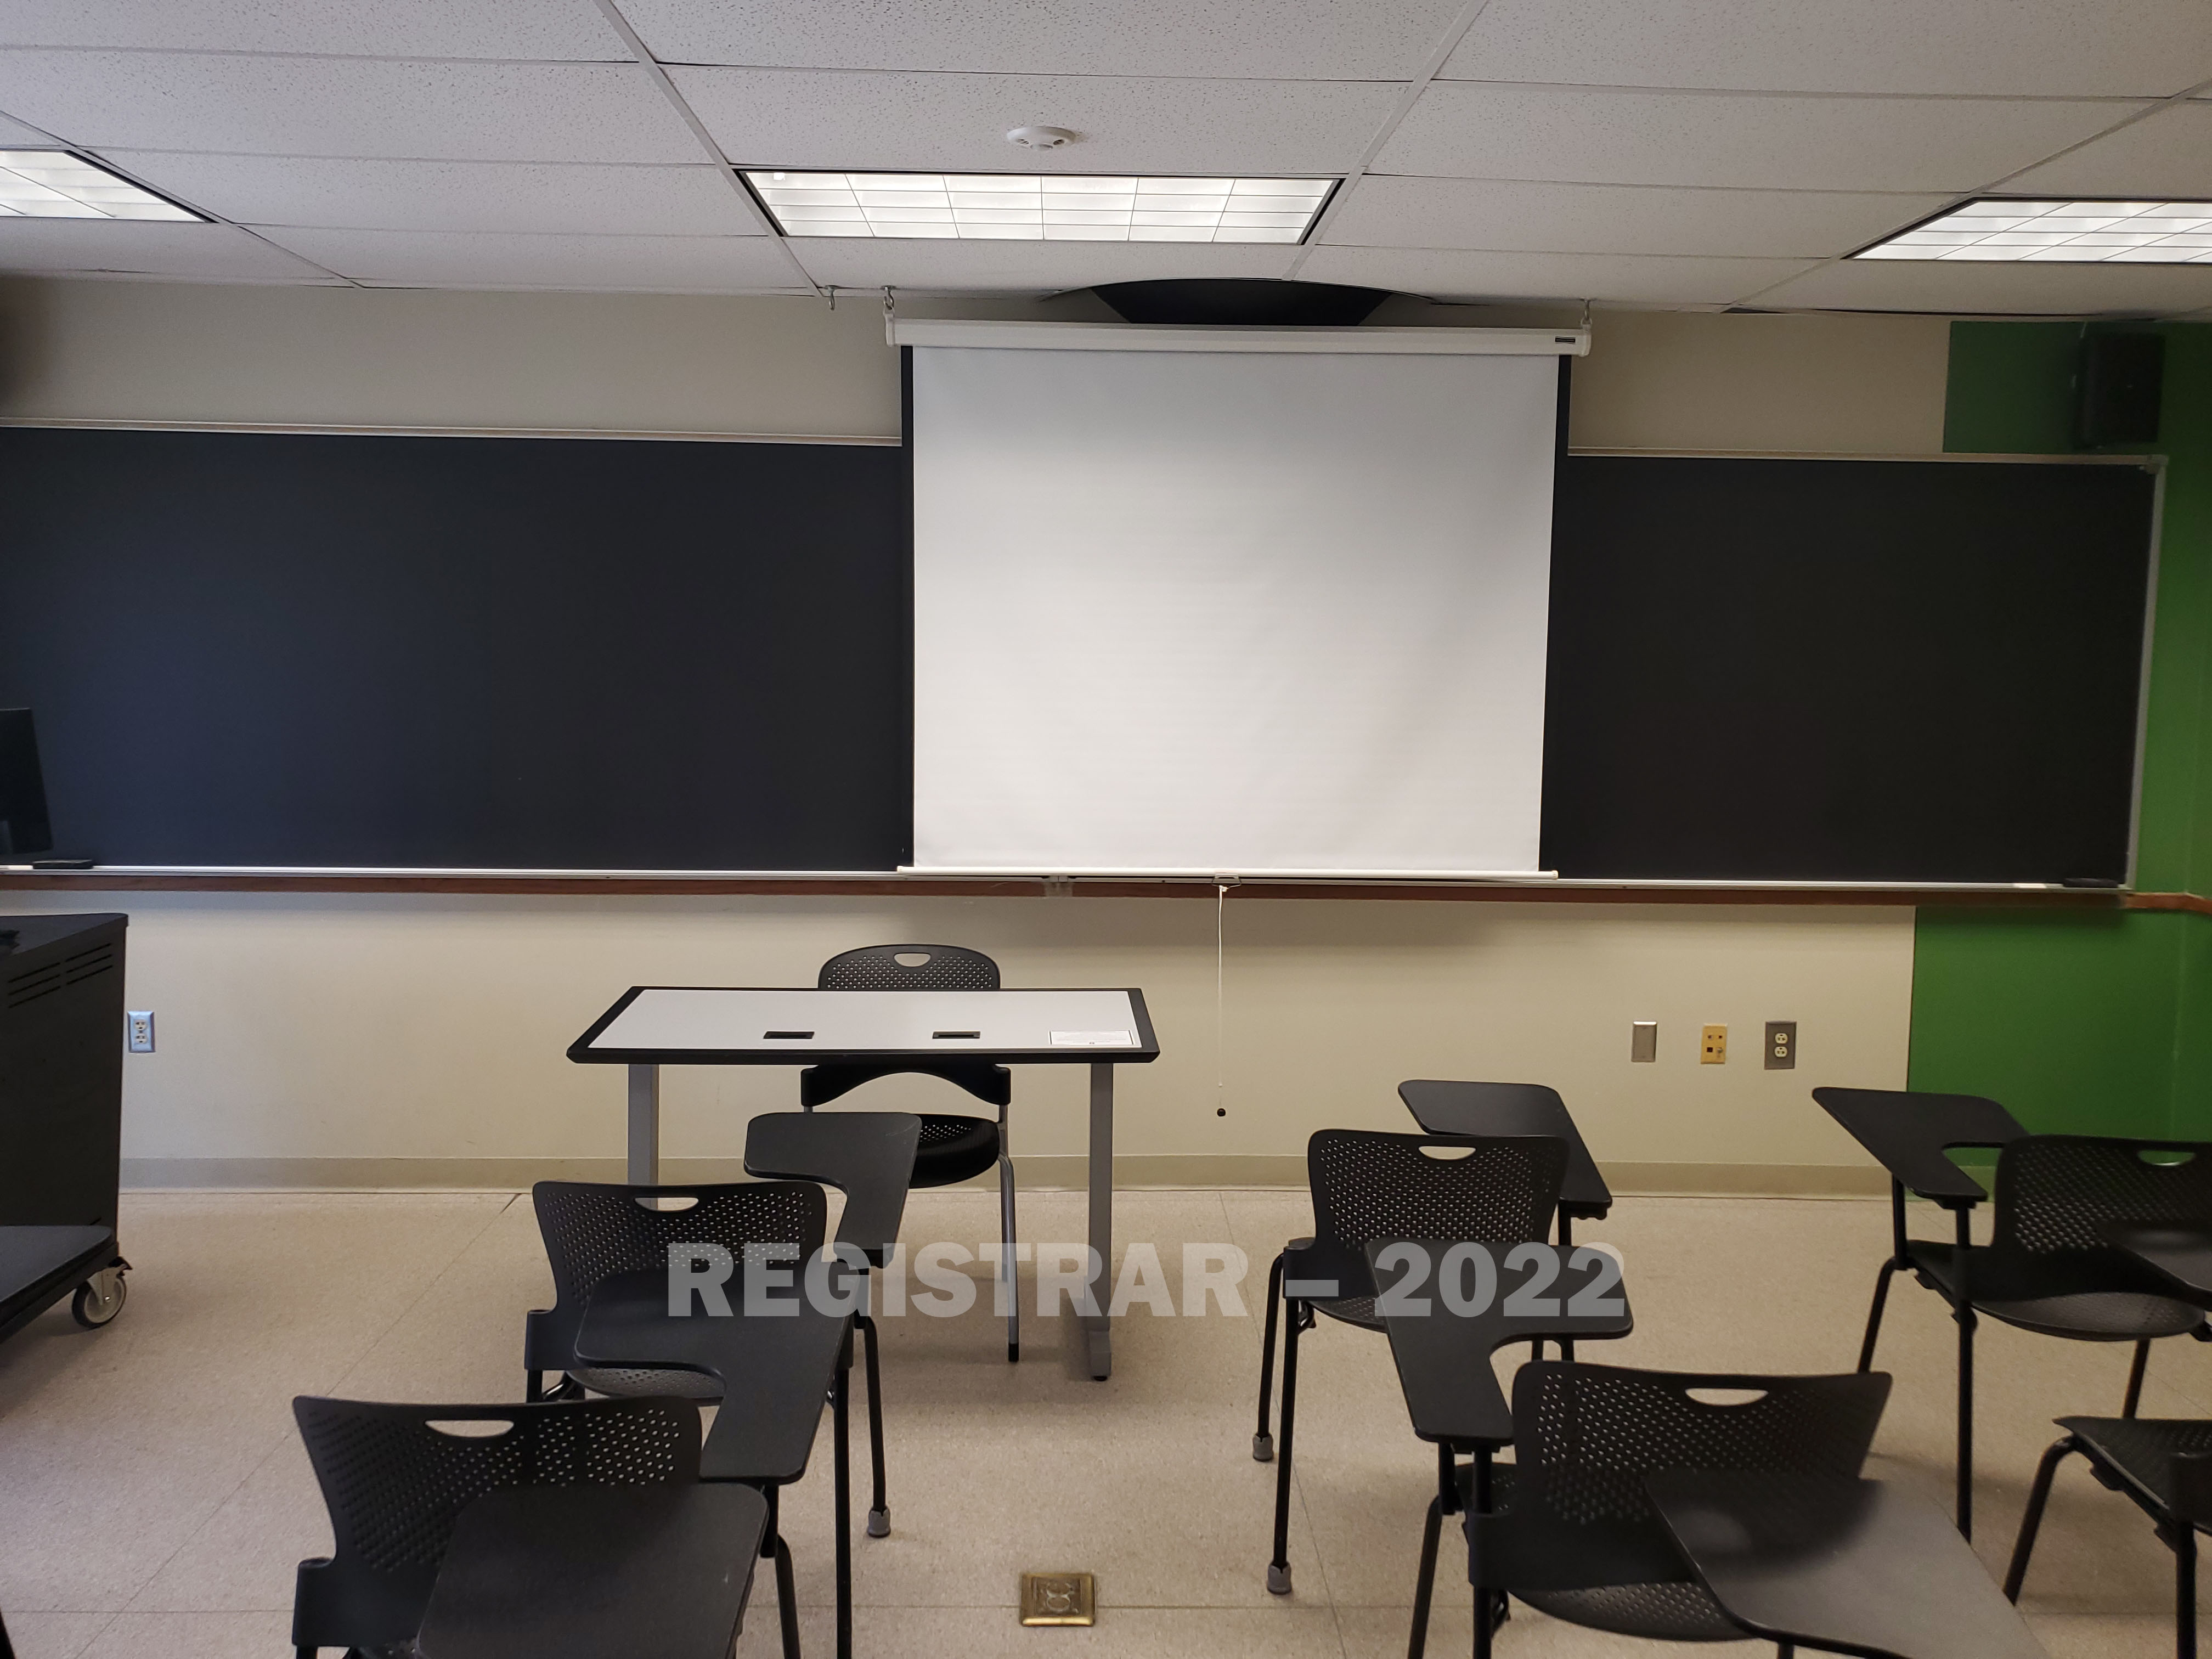 Enarson Classroom Building room 304 view from the back of the room with projector screen down